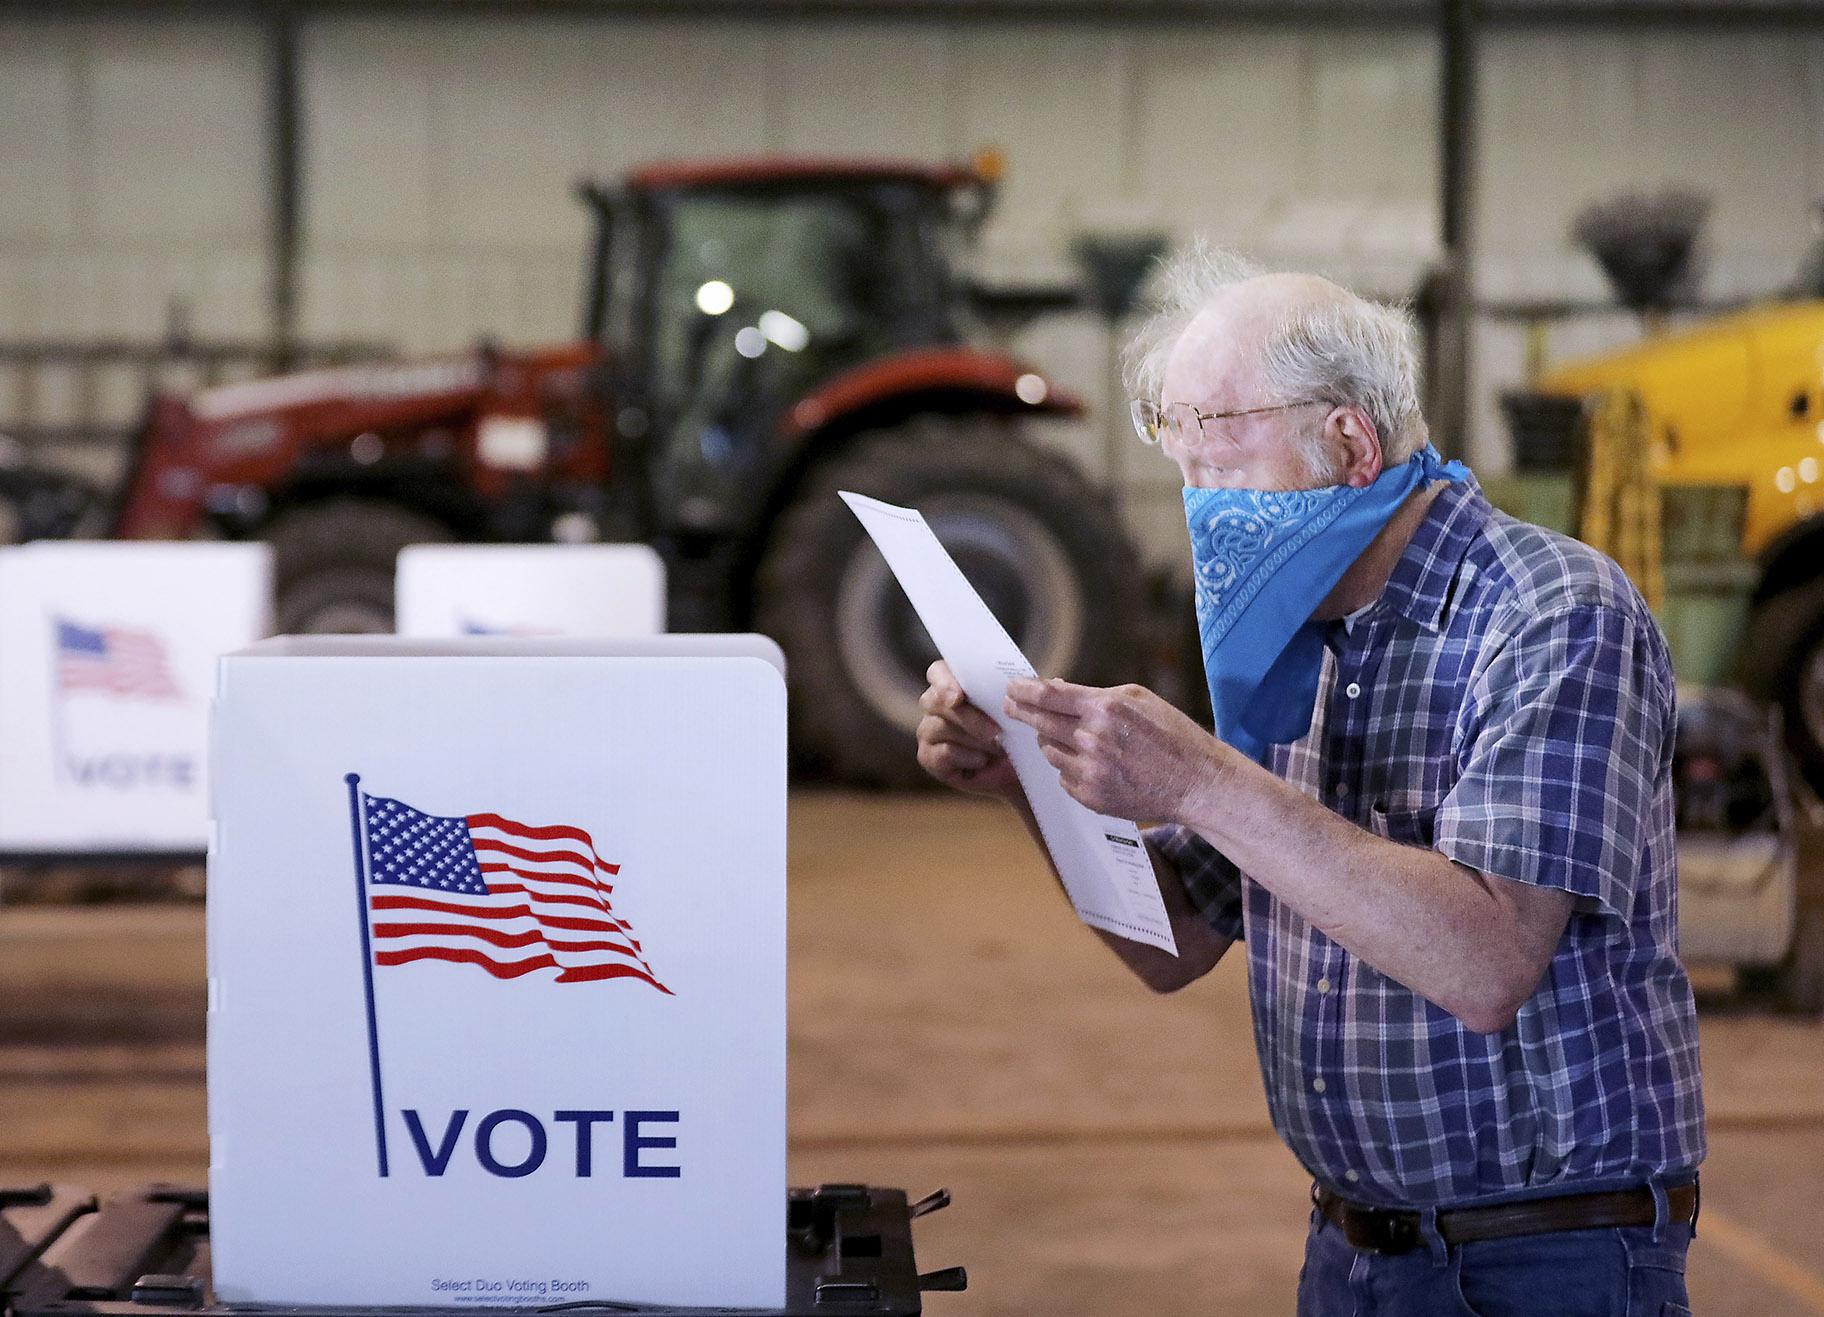 Robert Wilson reviews his selections on his ballot while voting at the town’s highway garage building Tuesday, April 7, 2020 in Dunn, Wis. (John Hart / Wisconsin State Journal via AP)